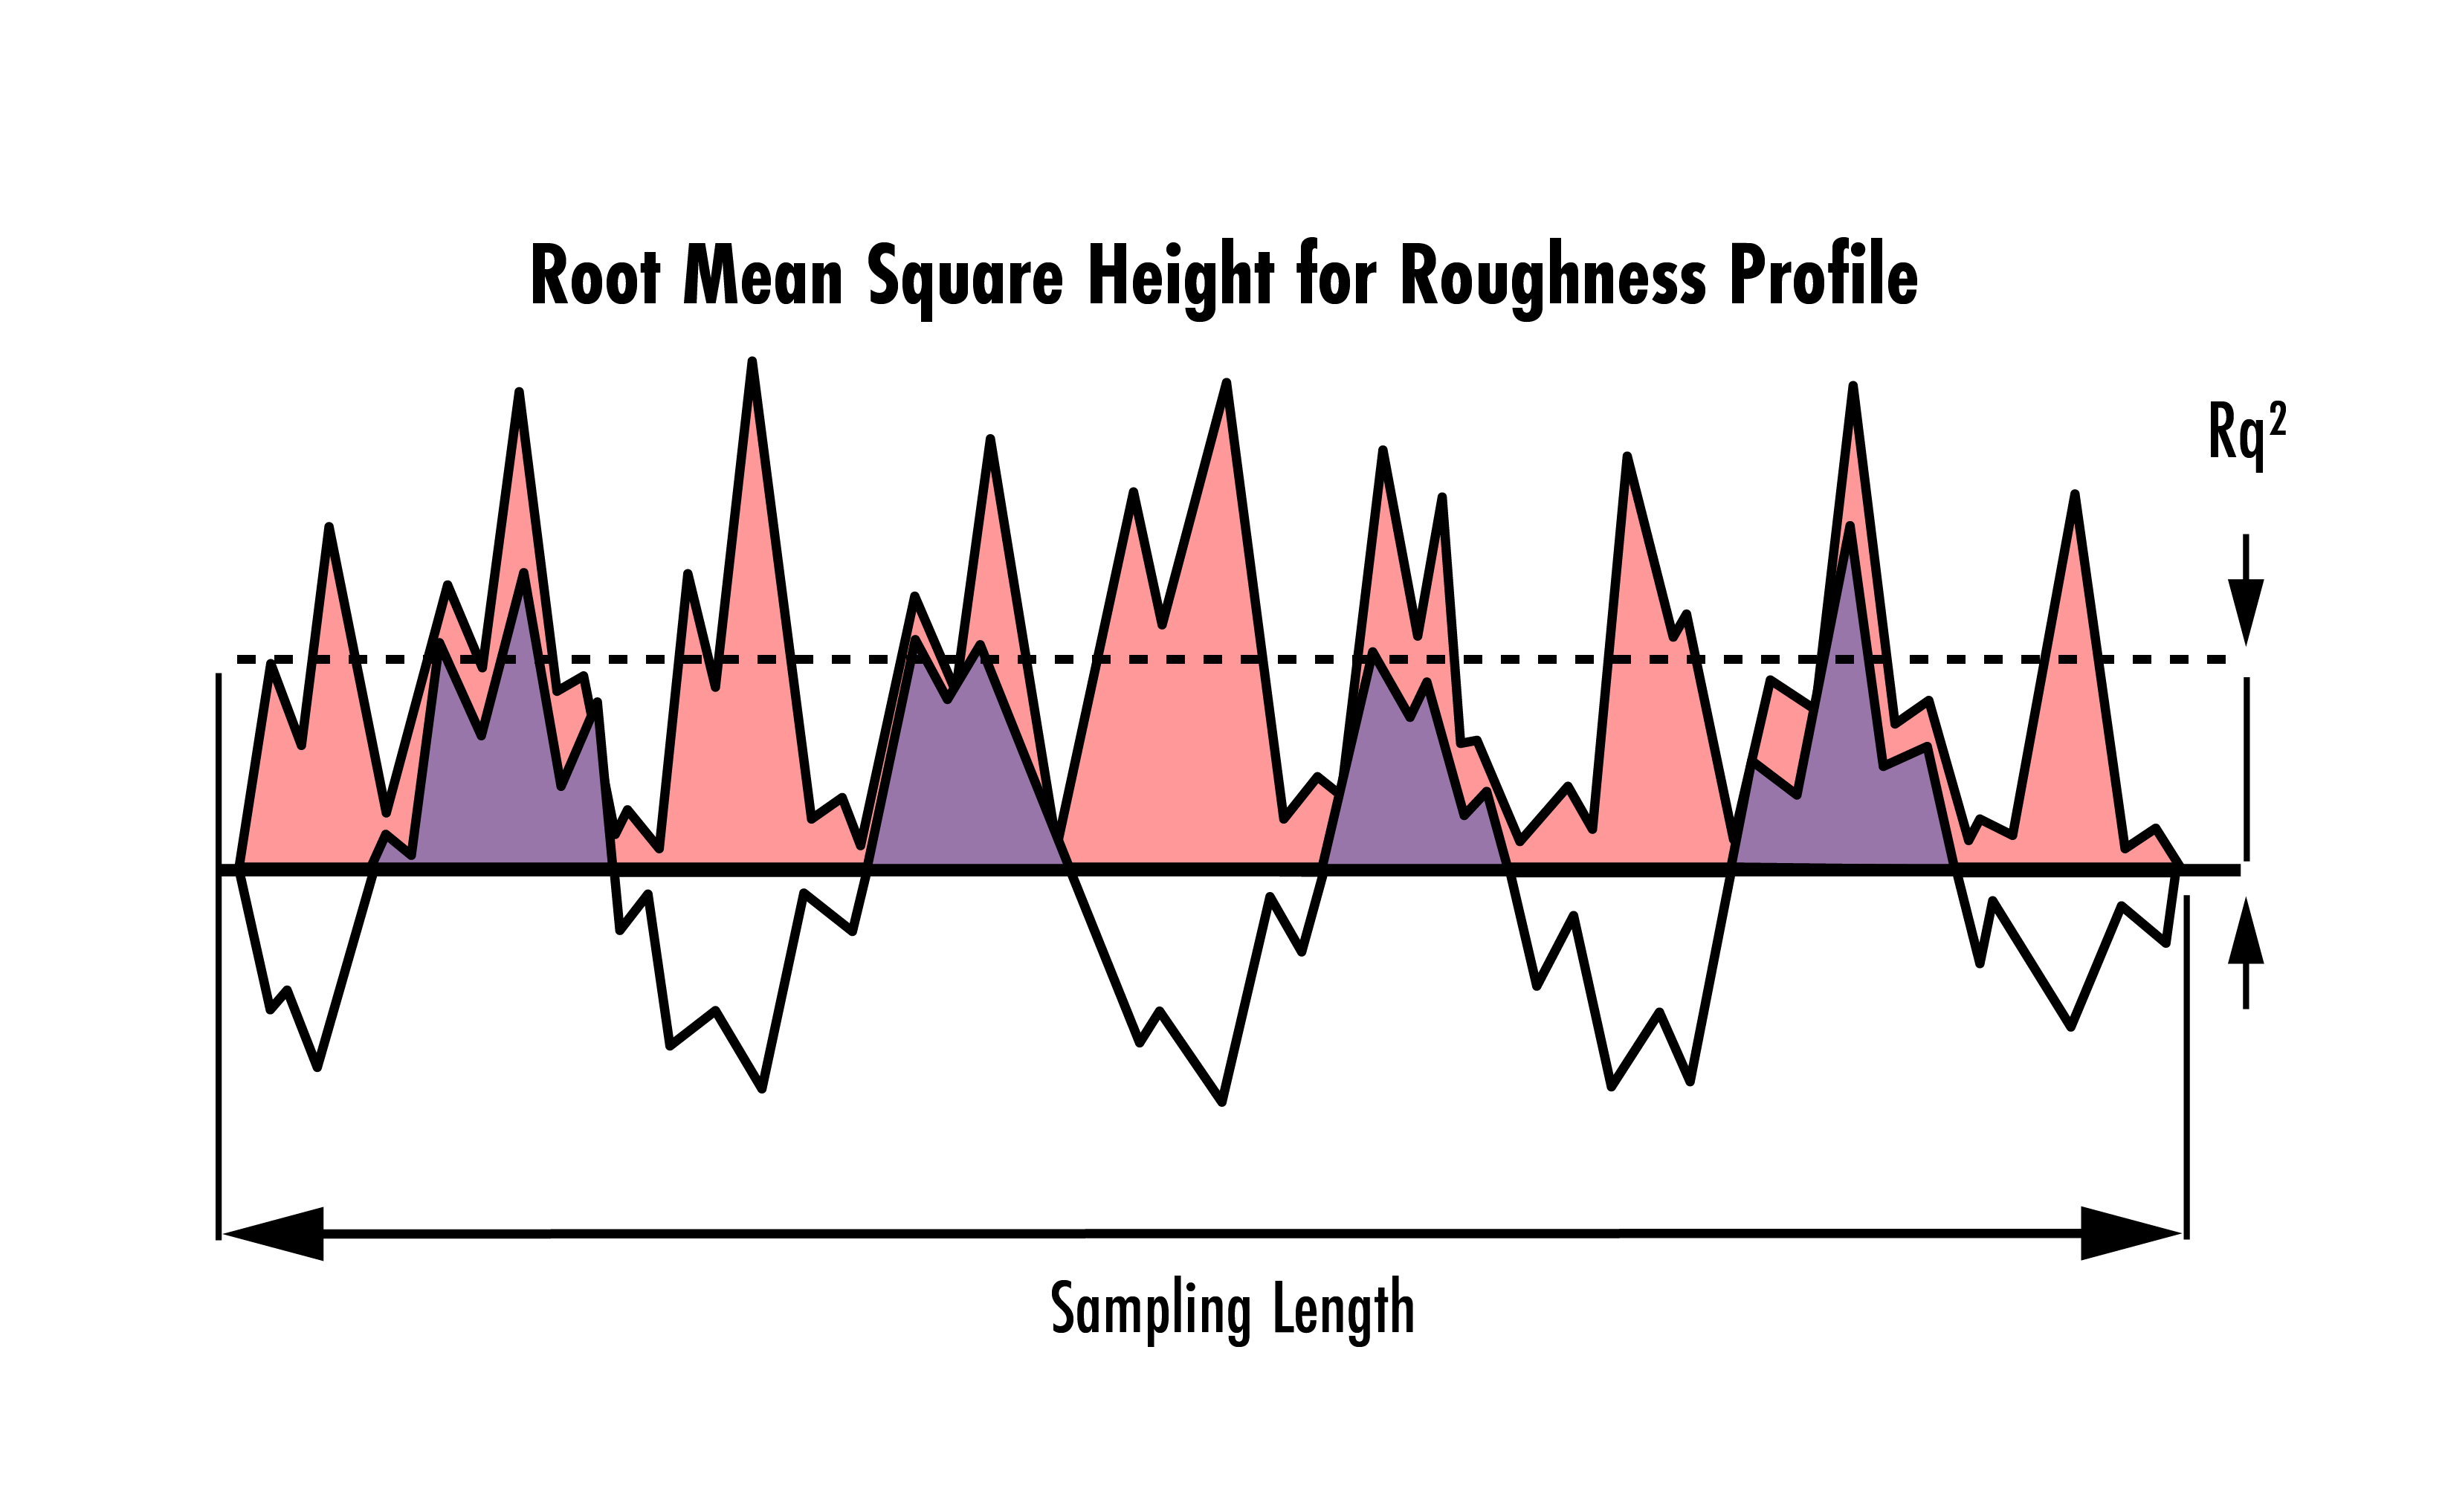 Example of a roughness profile measured over a given sampling length. The Rq2 indicates the root mean square height. 